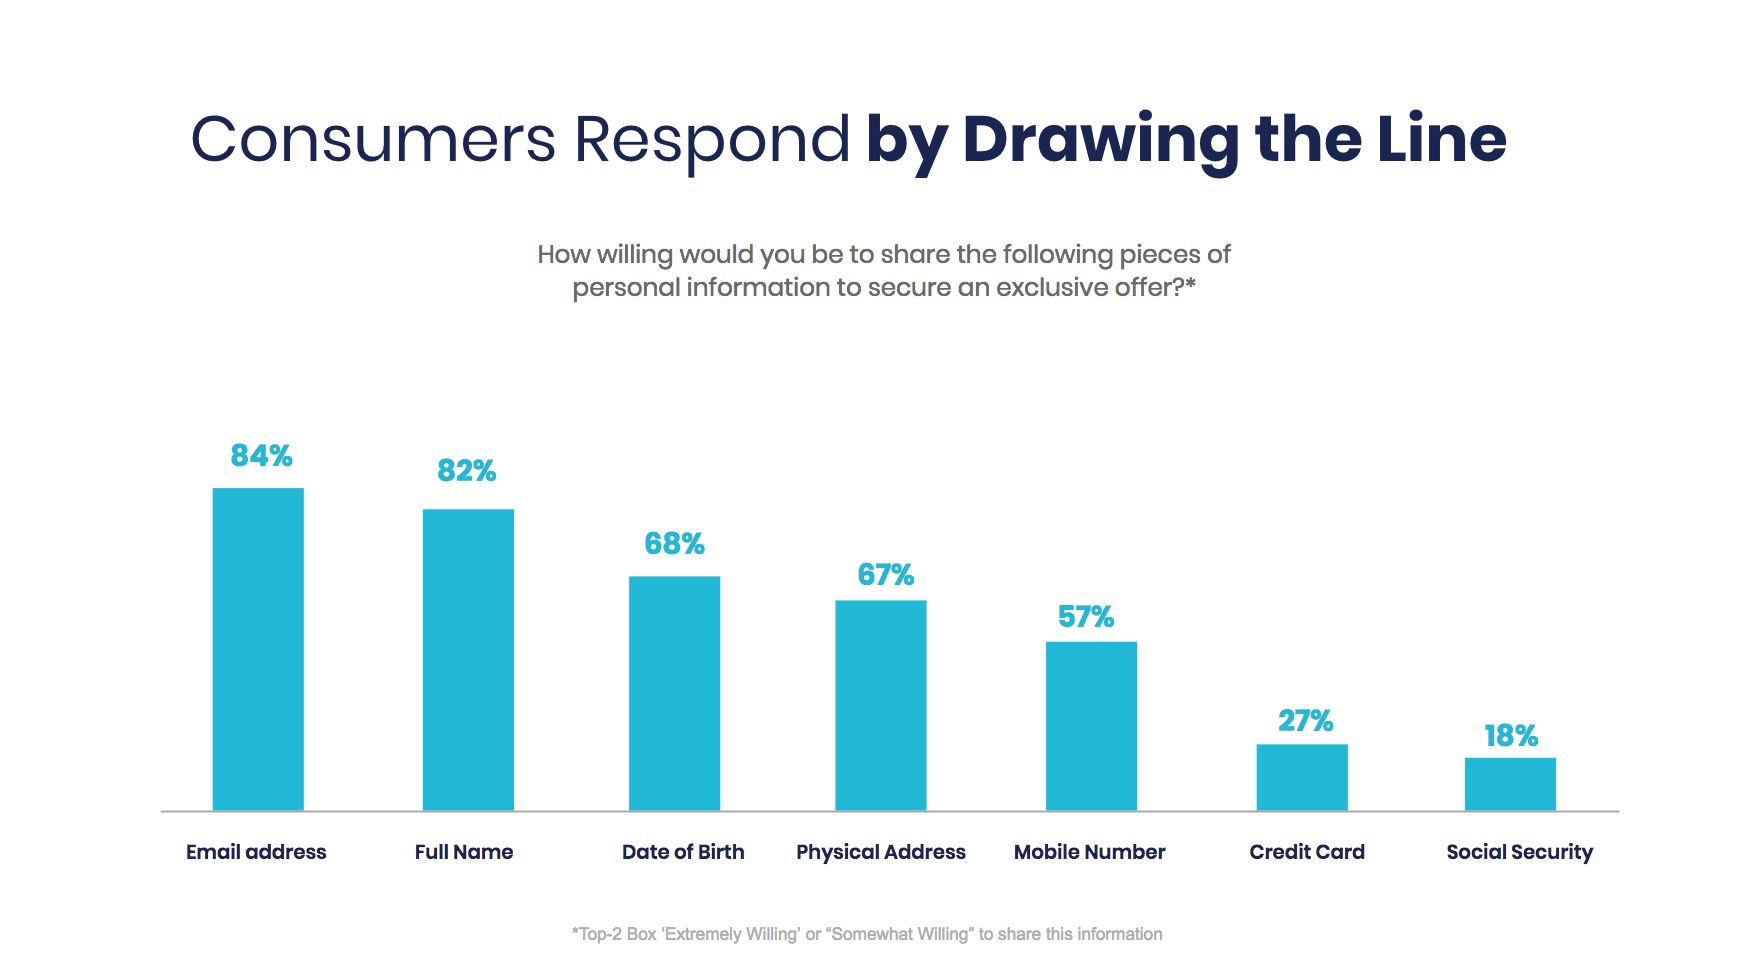 A graph depicting how willing shoppers would be to share various pieces of personal information in order to receive an exclusive offer.